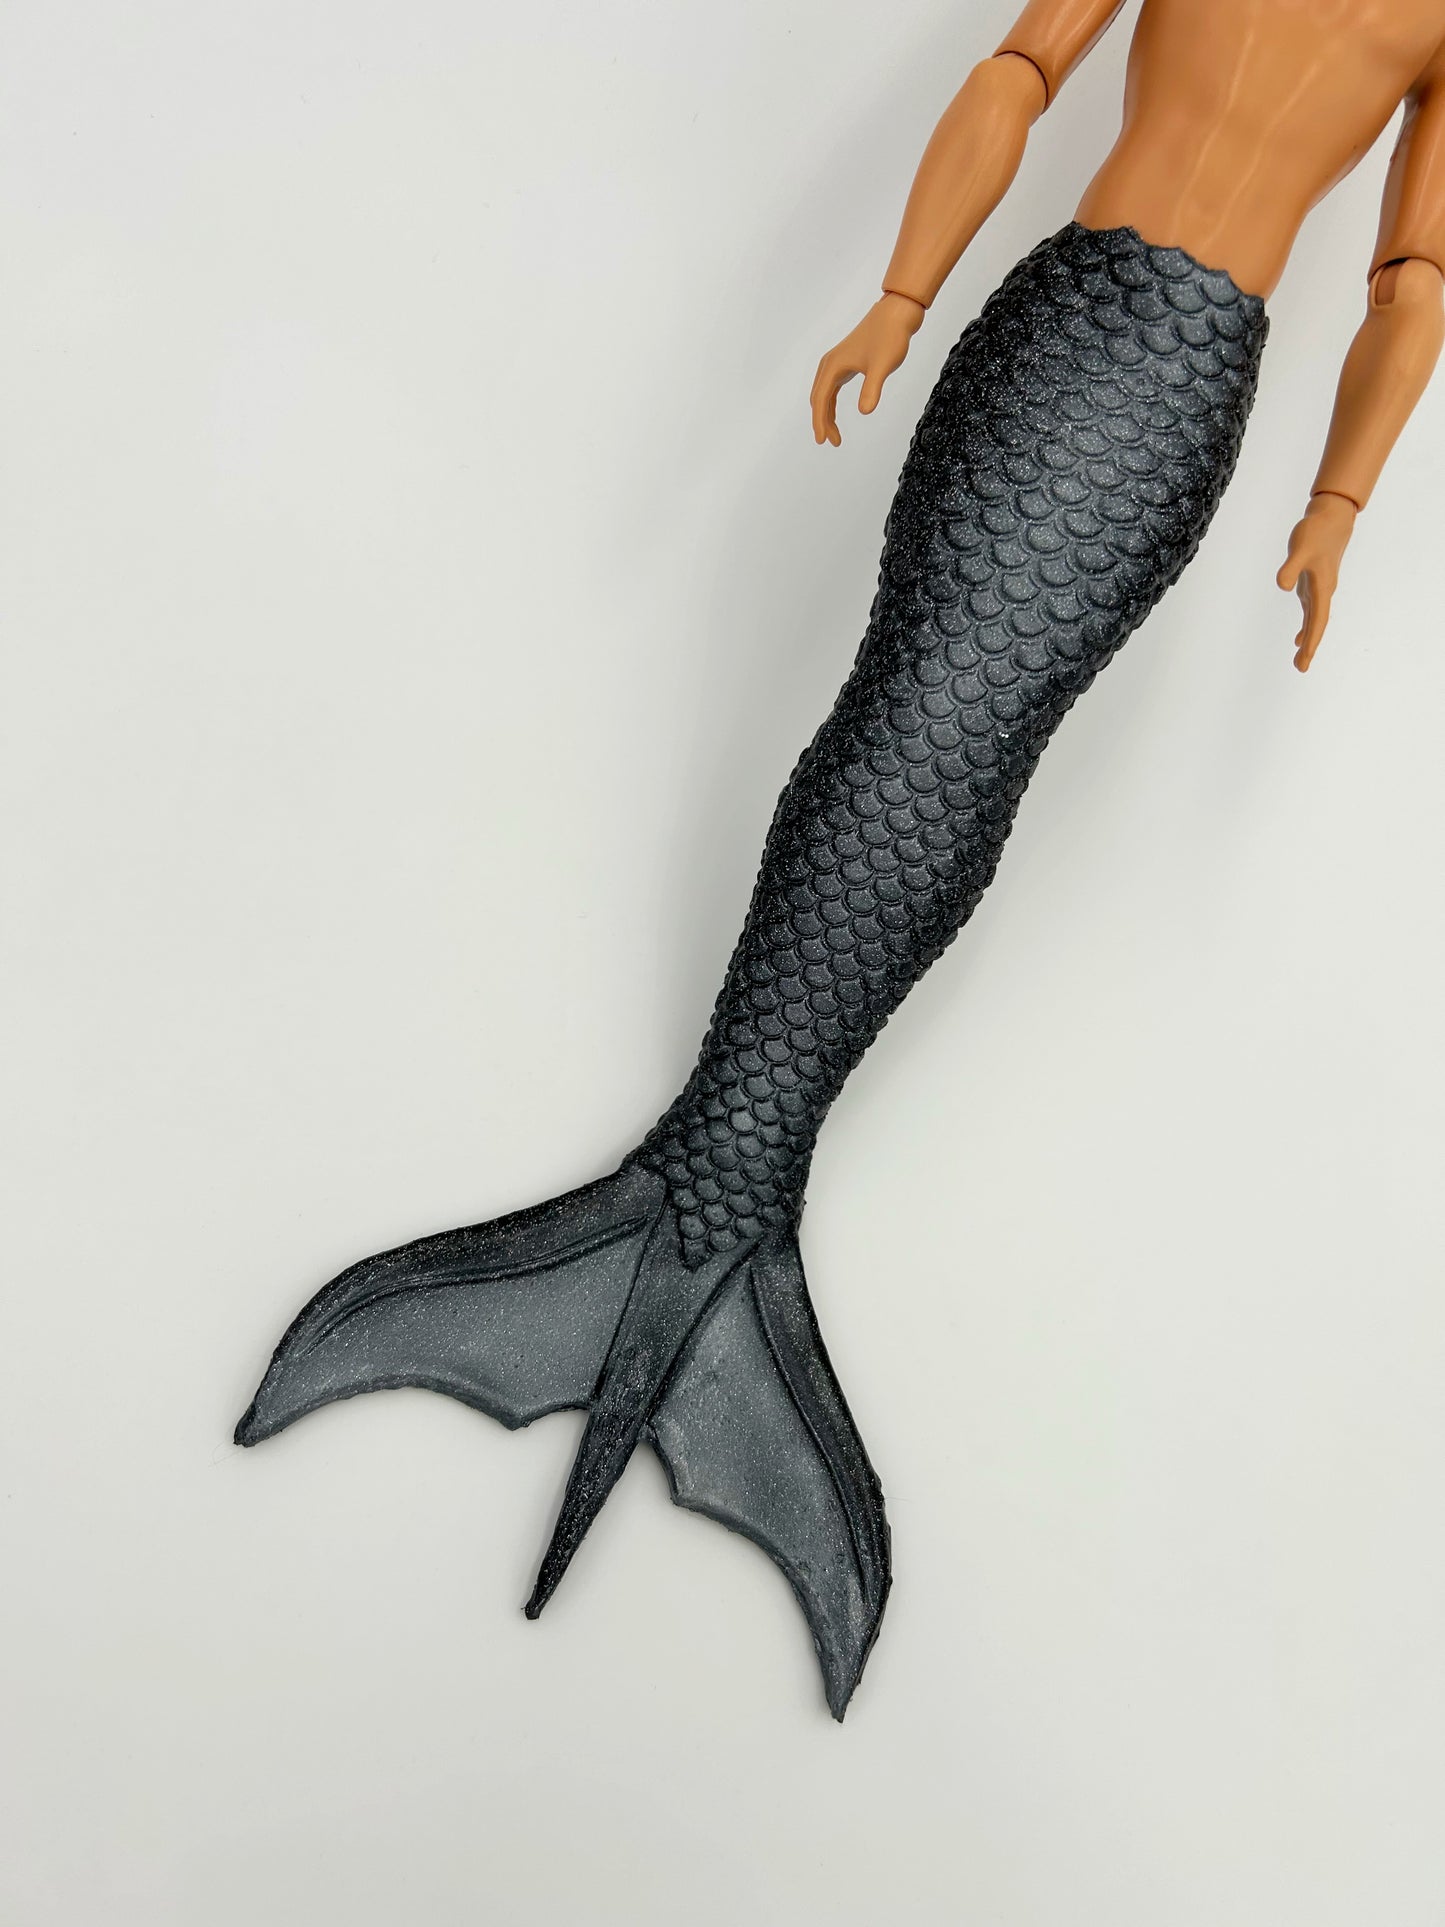 Siren Ryn silicone mermaid tail for doll (doll not included)